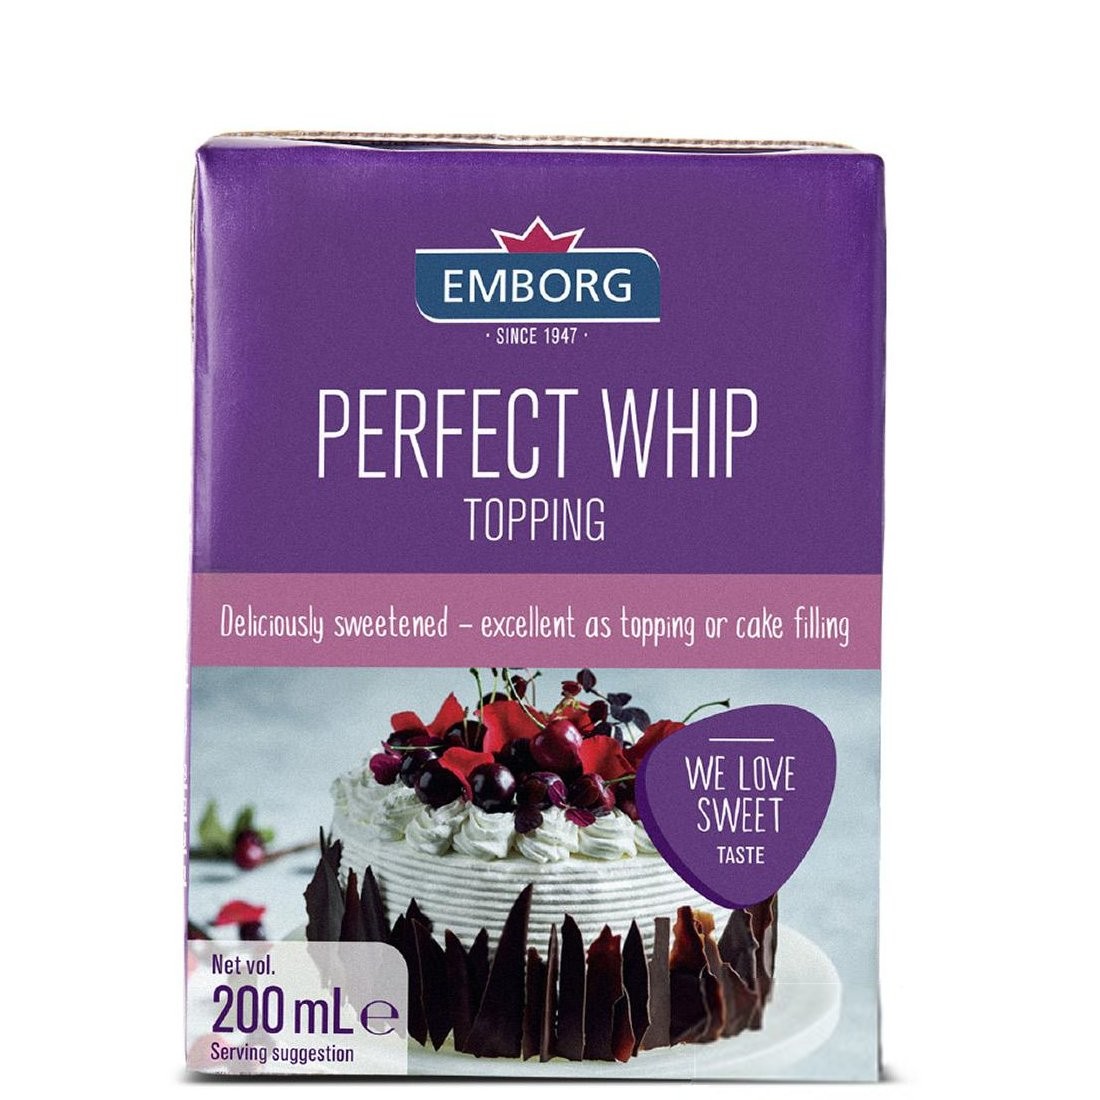 EMBORG PERFECT WHIP TOPPING 200ml